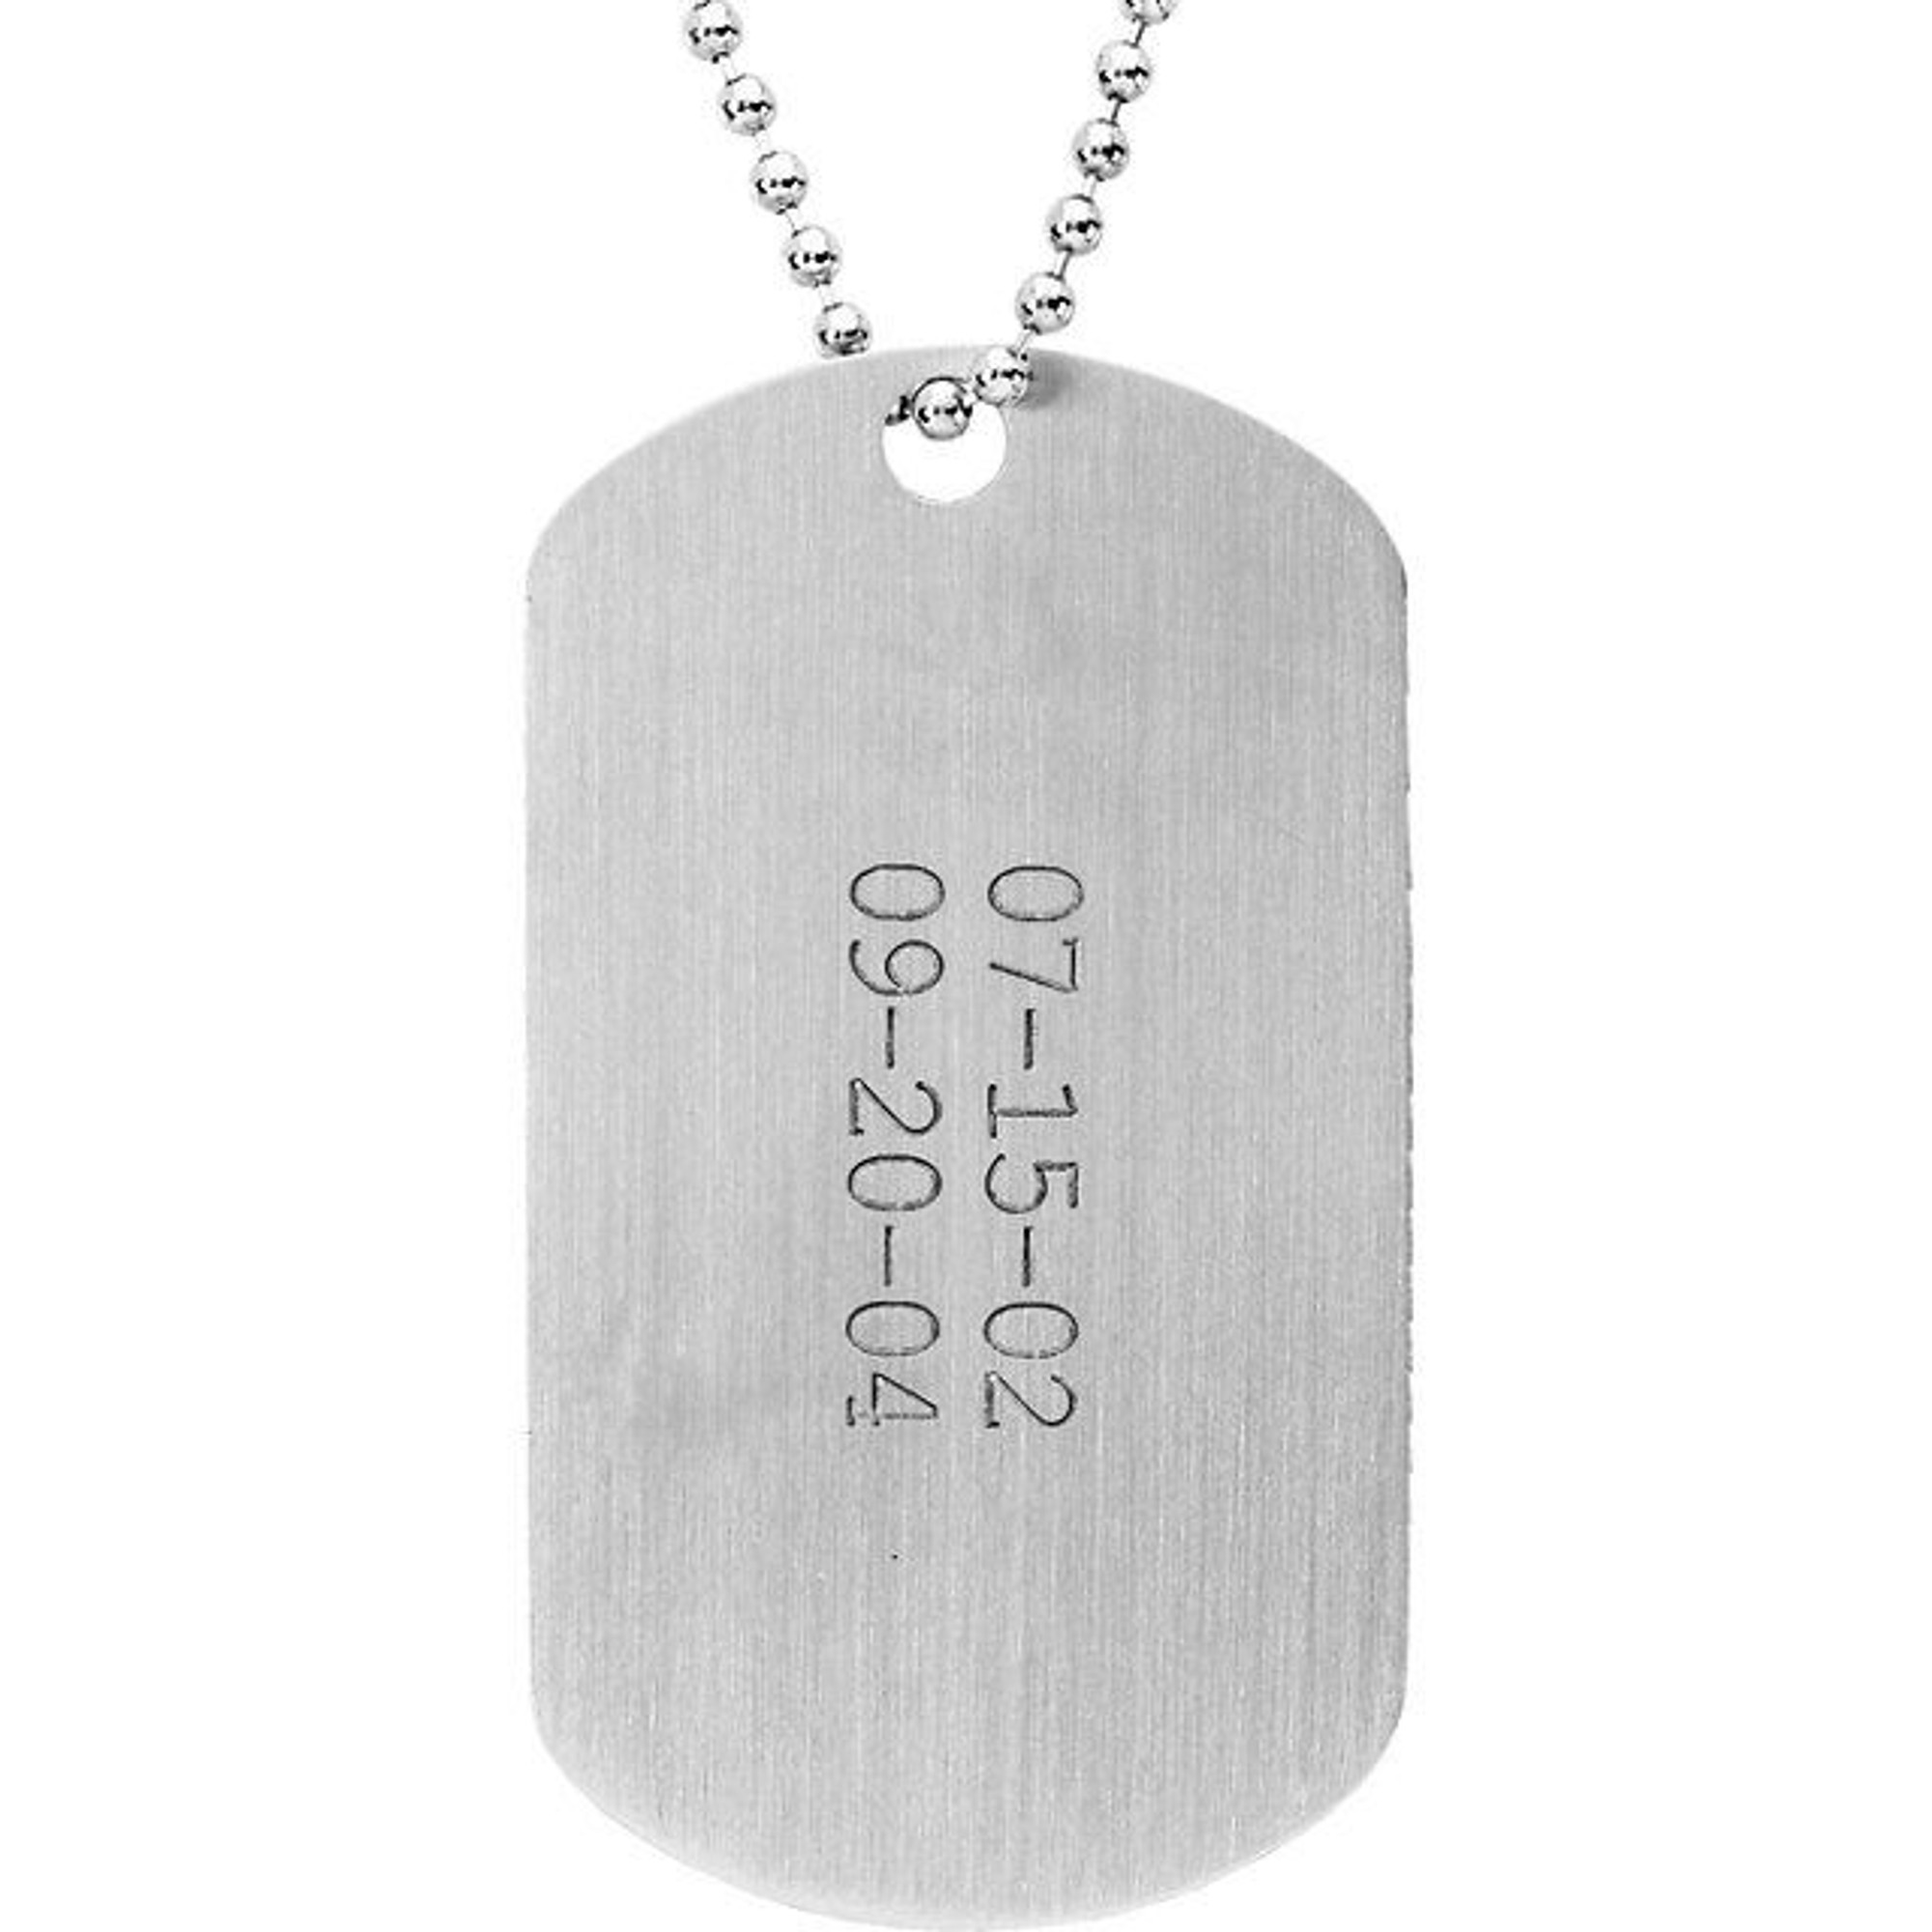 Asma Jewel House Stainless Steel Plain Double Dog Tag ID Pendant Necklace,  28